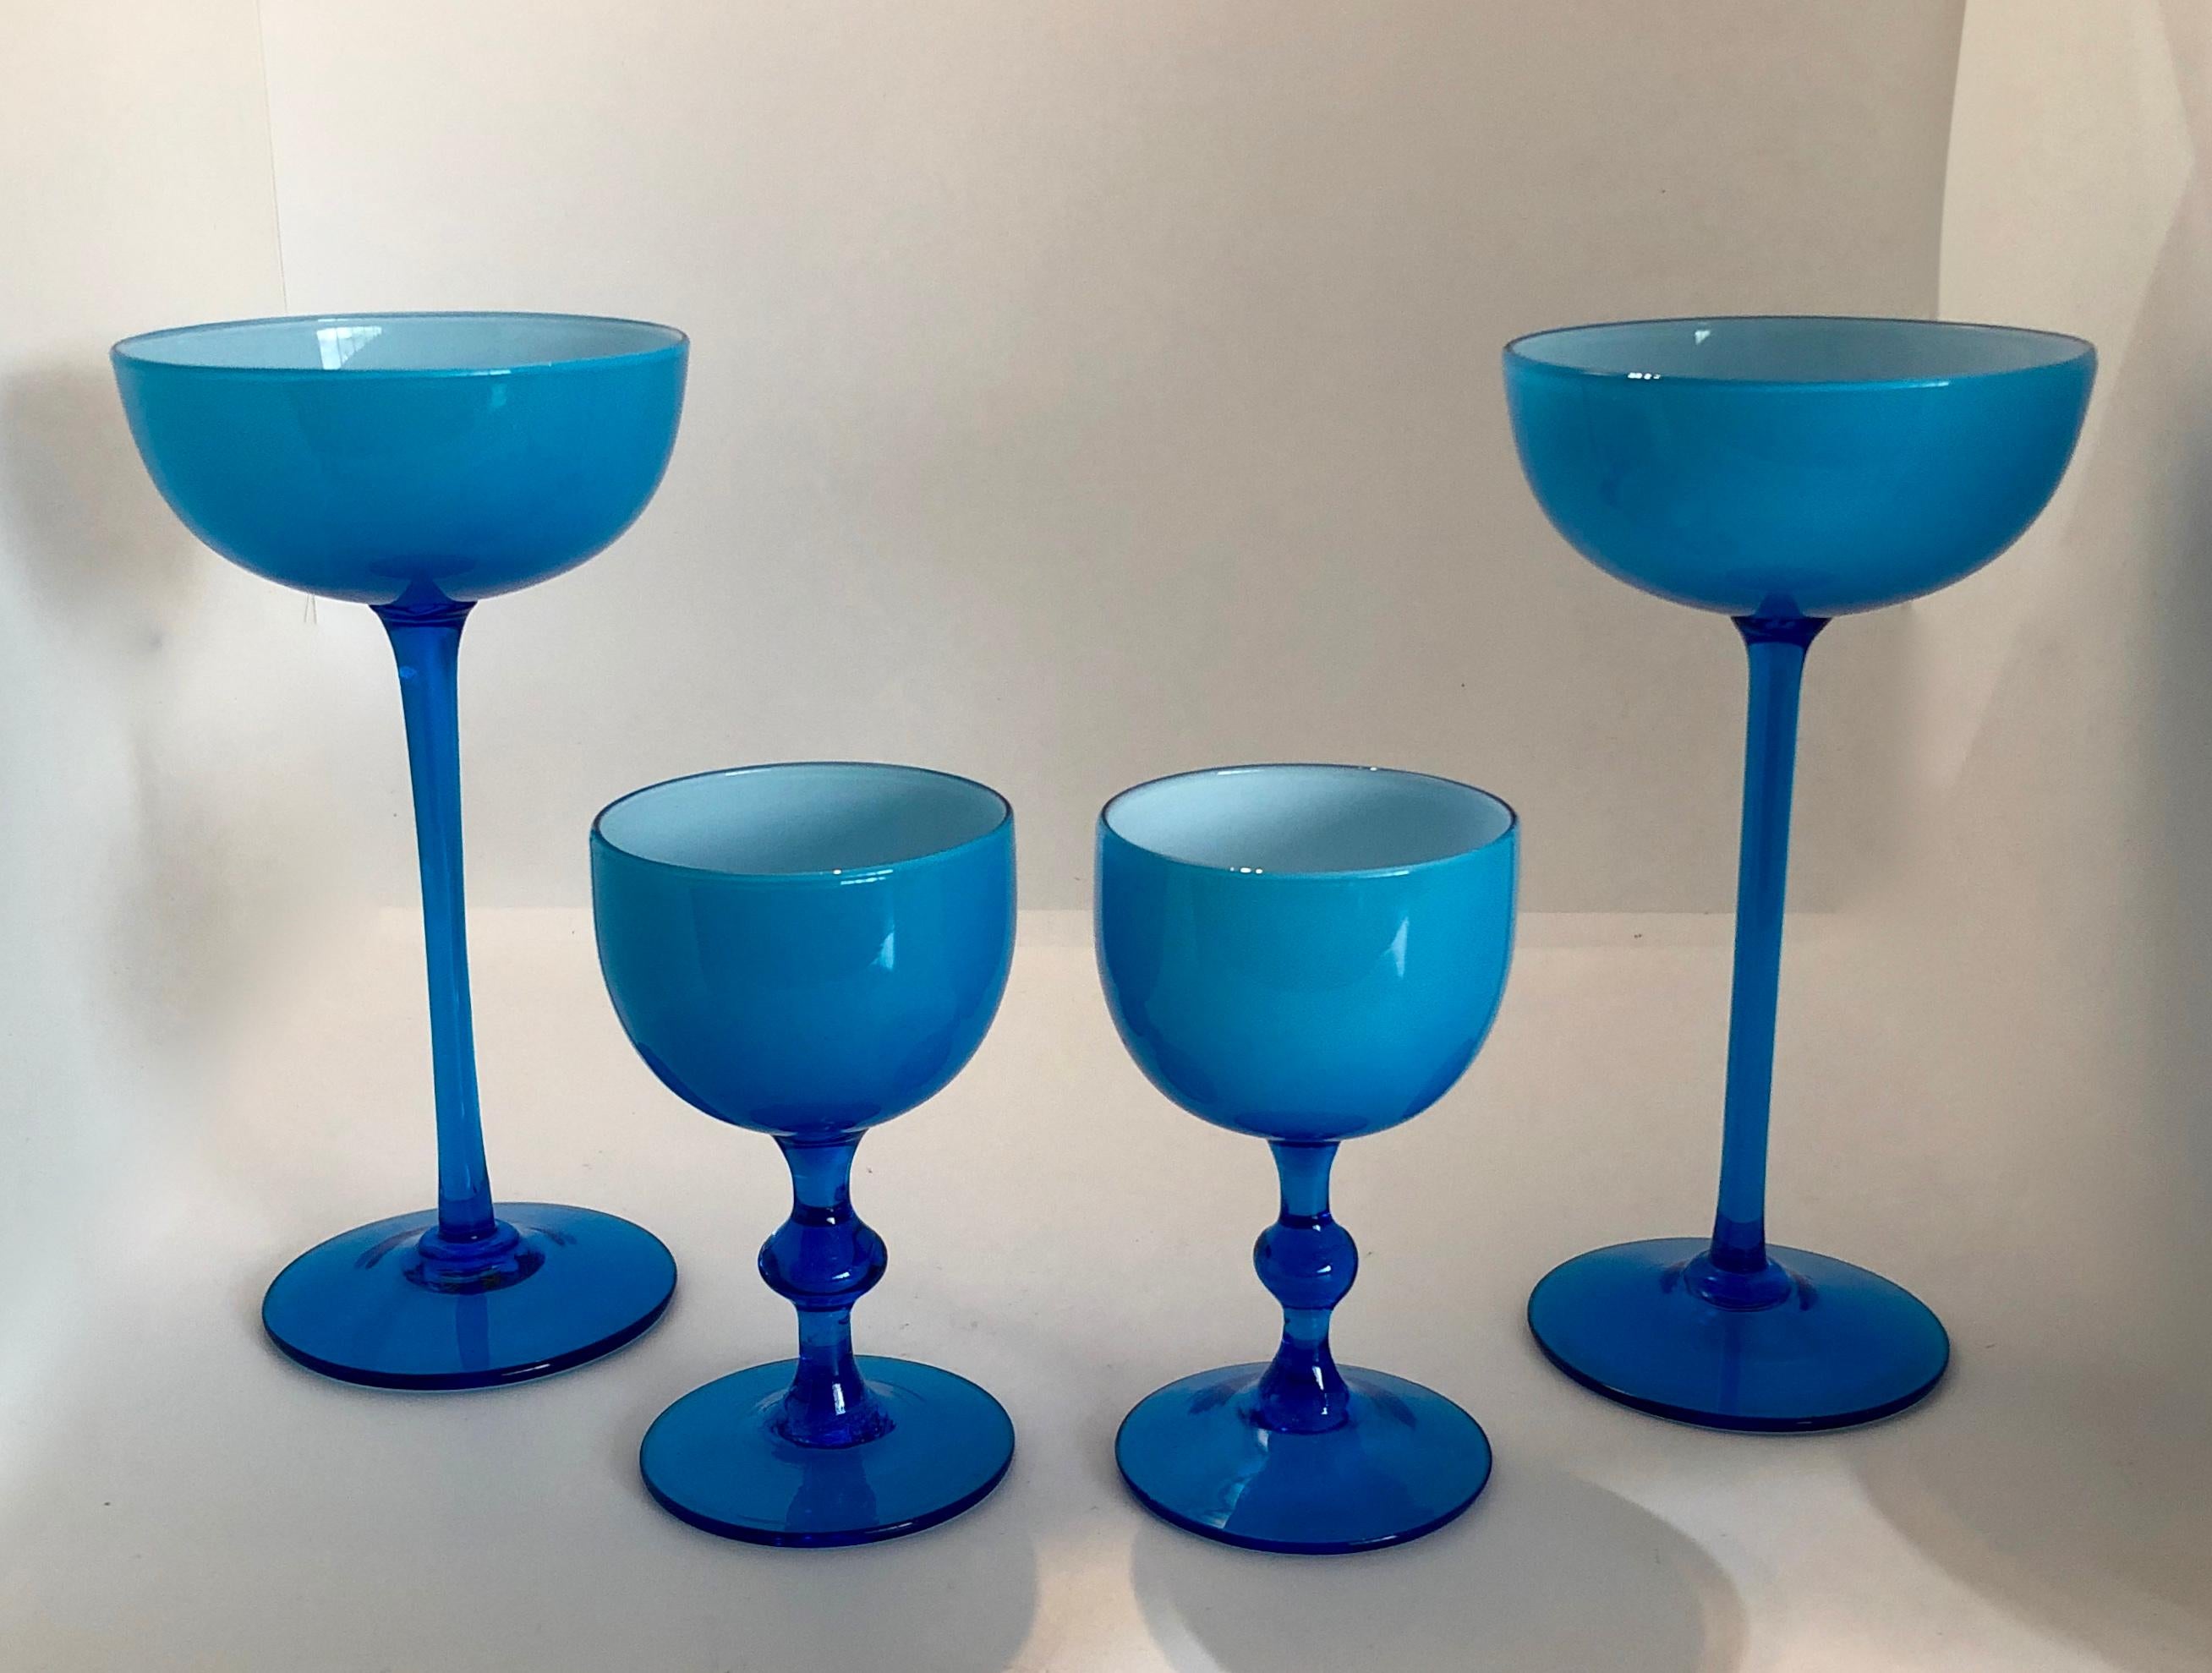 Offered is a Mid-Century Modern set of four Italian blown glass white encased cerulean / light blue stemmed goblets, comprising of two tall stem champagne coupes (measures: 7